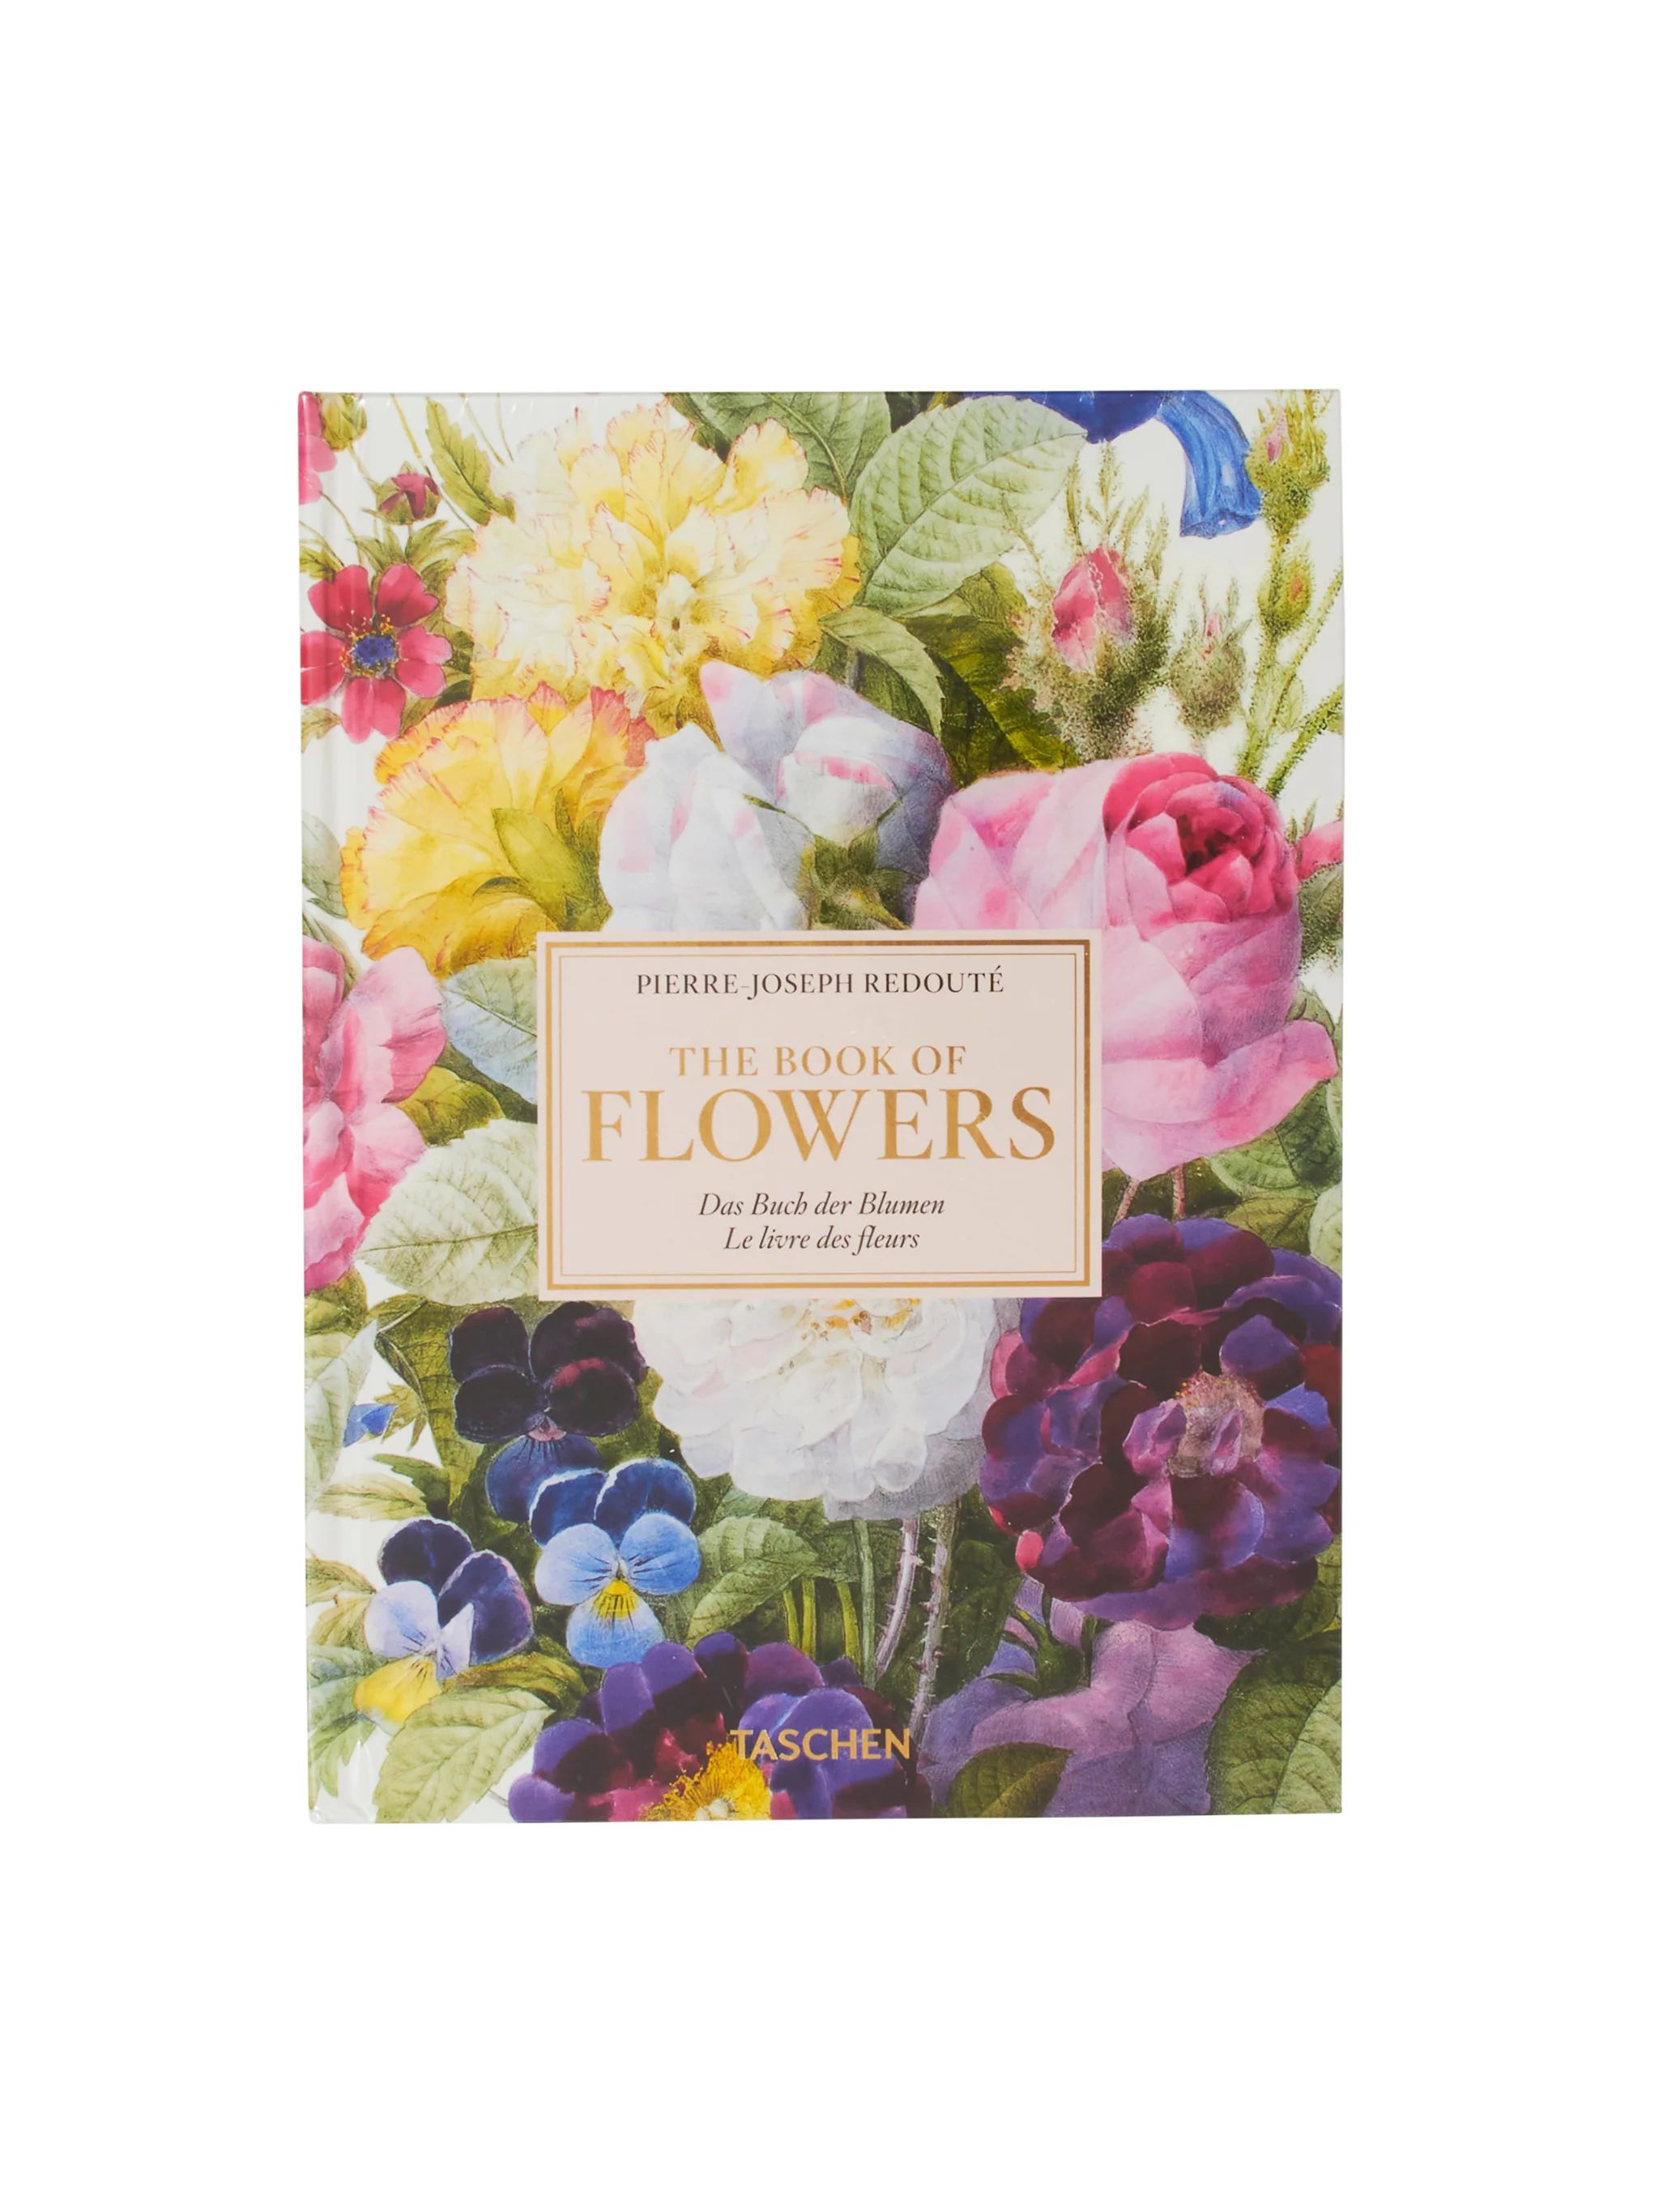 The Book of Flowers Taschen | Weston Table